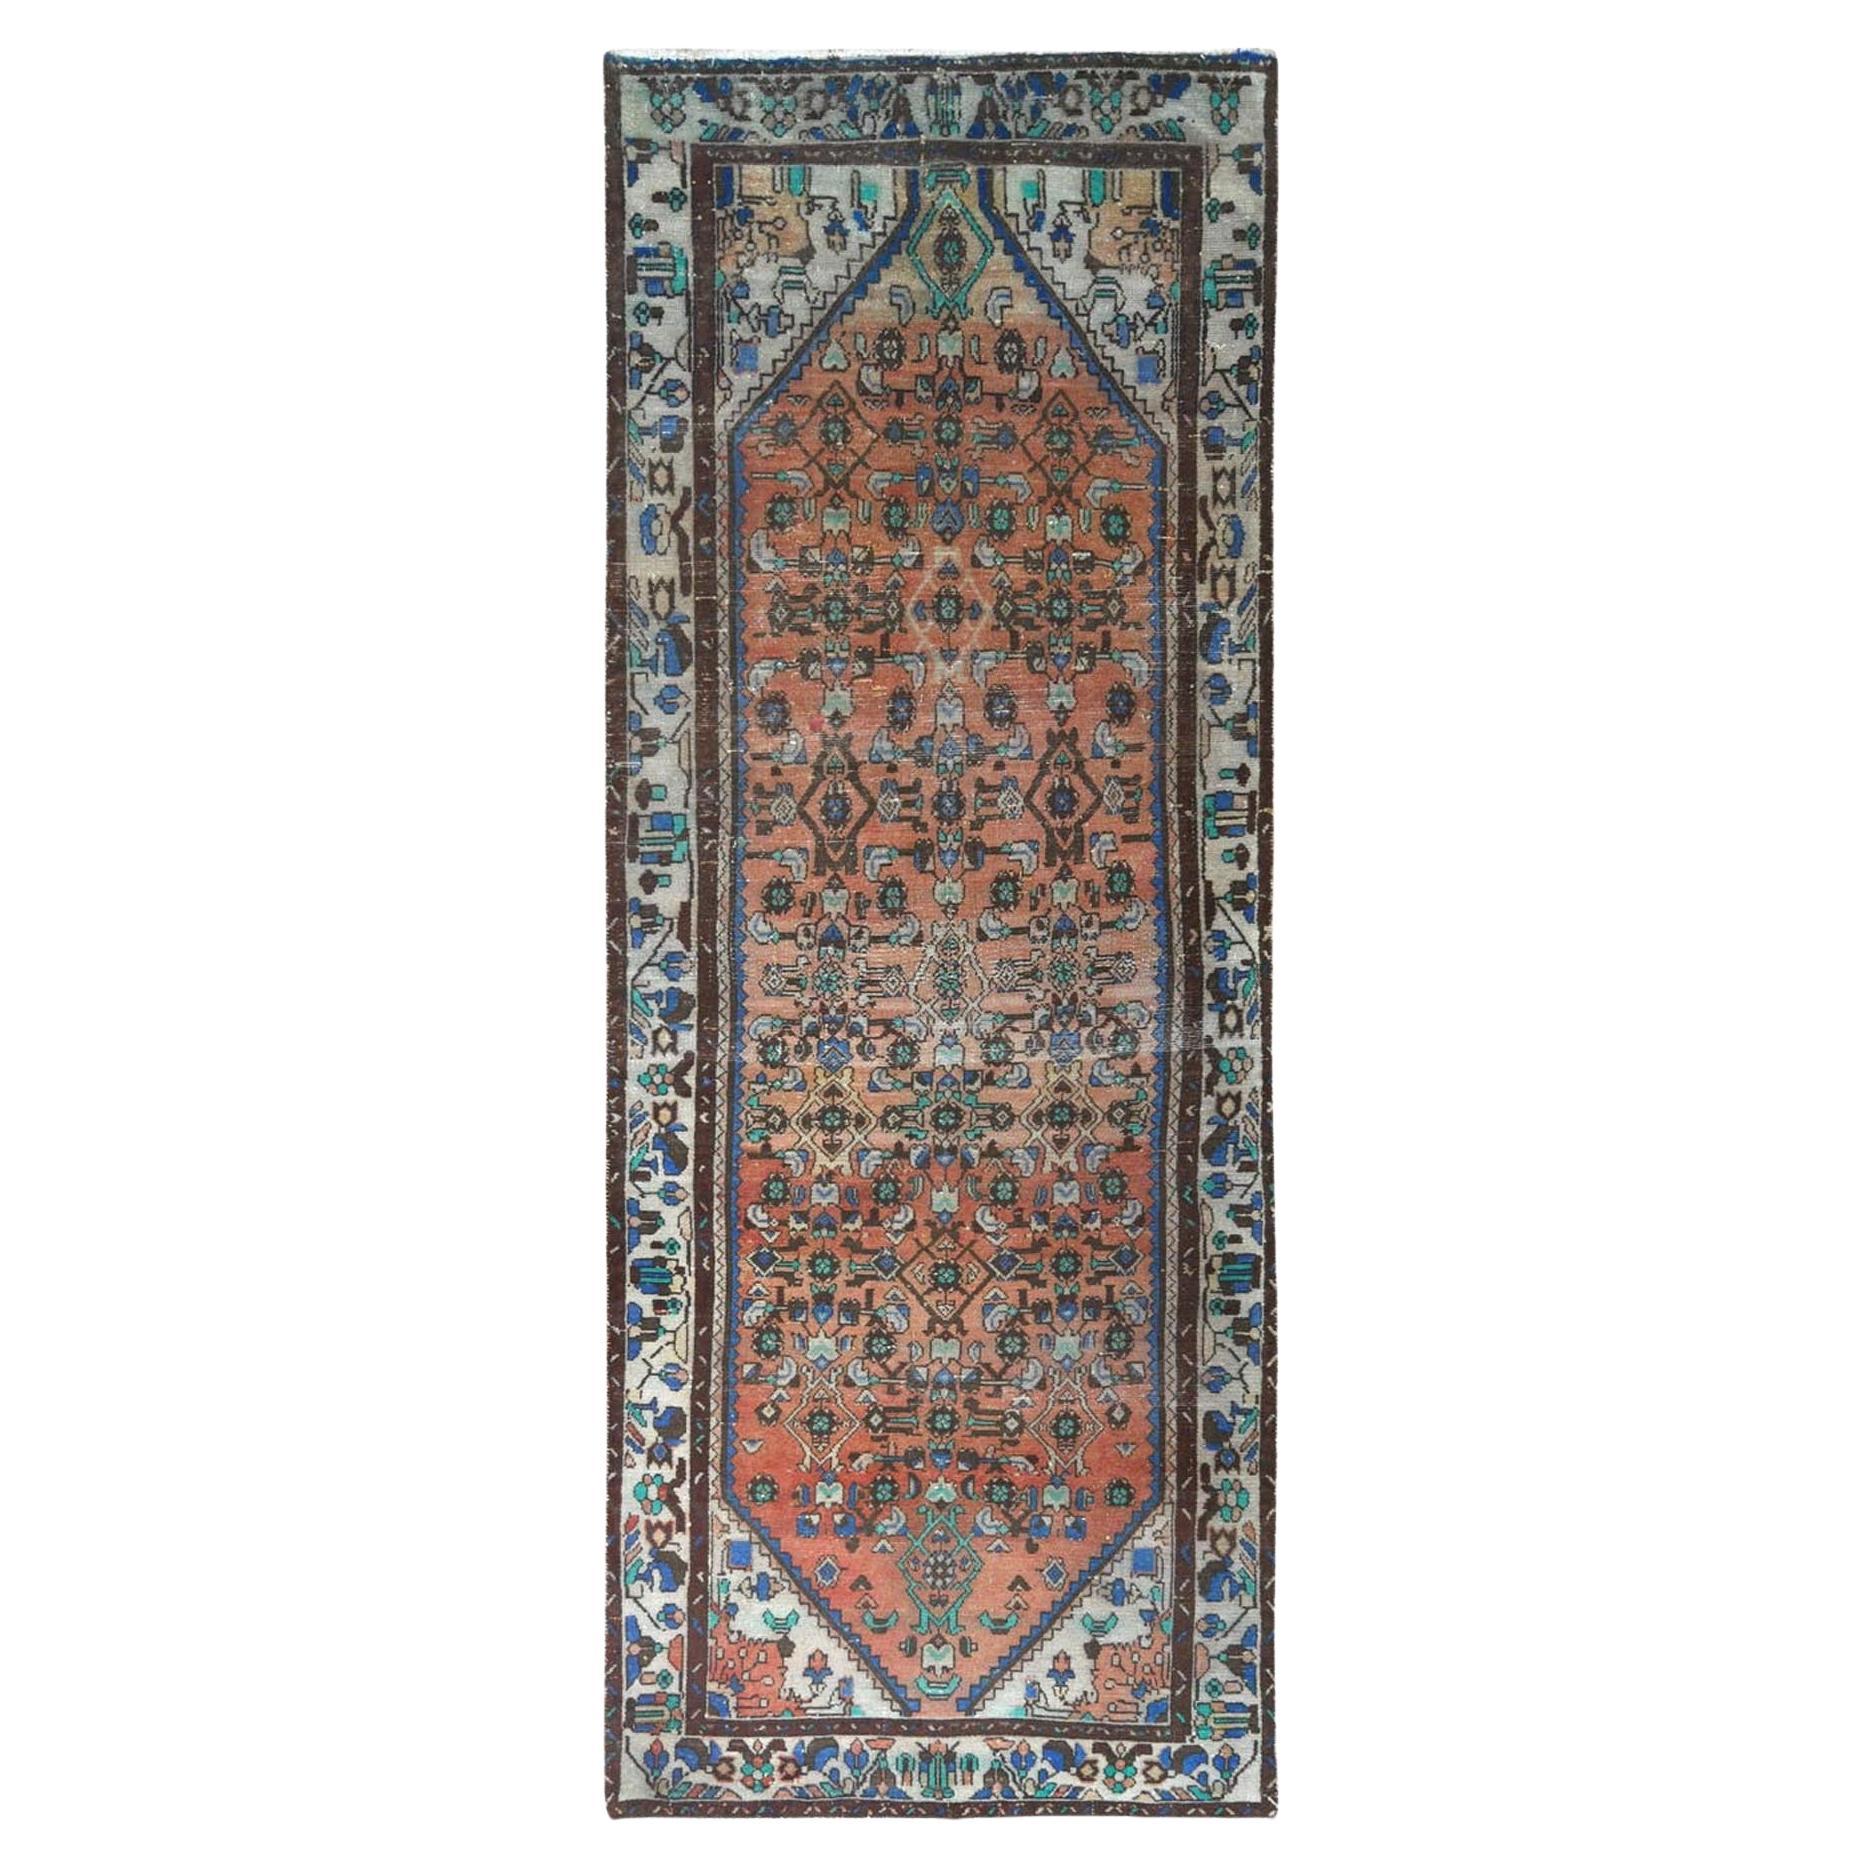 Sunset Colors Vintage Persian Husainabad Abrash Worn Wool Hand Knotted Rug